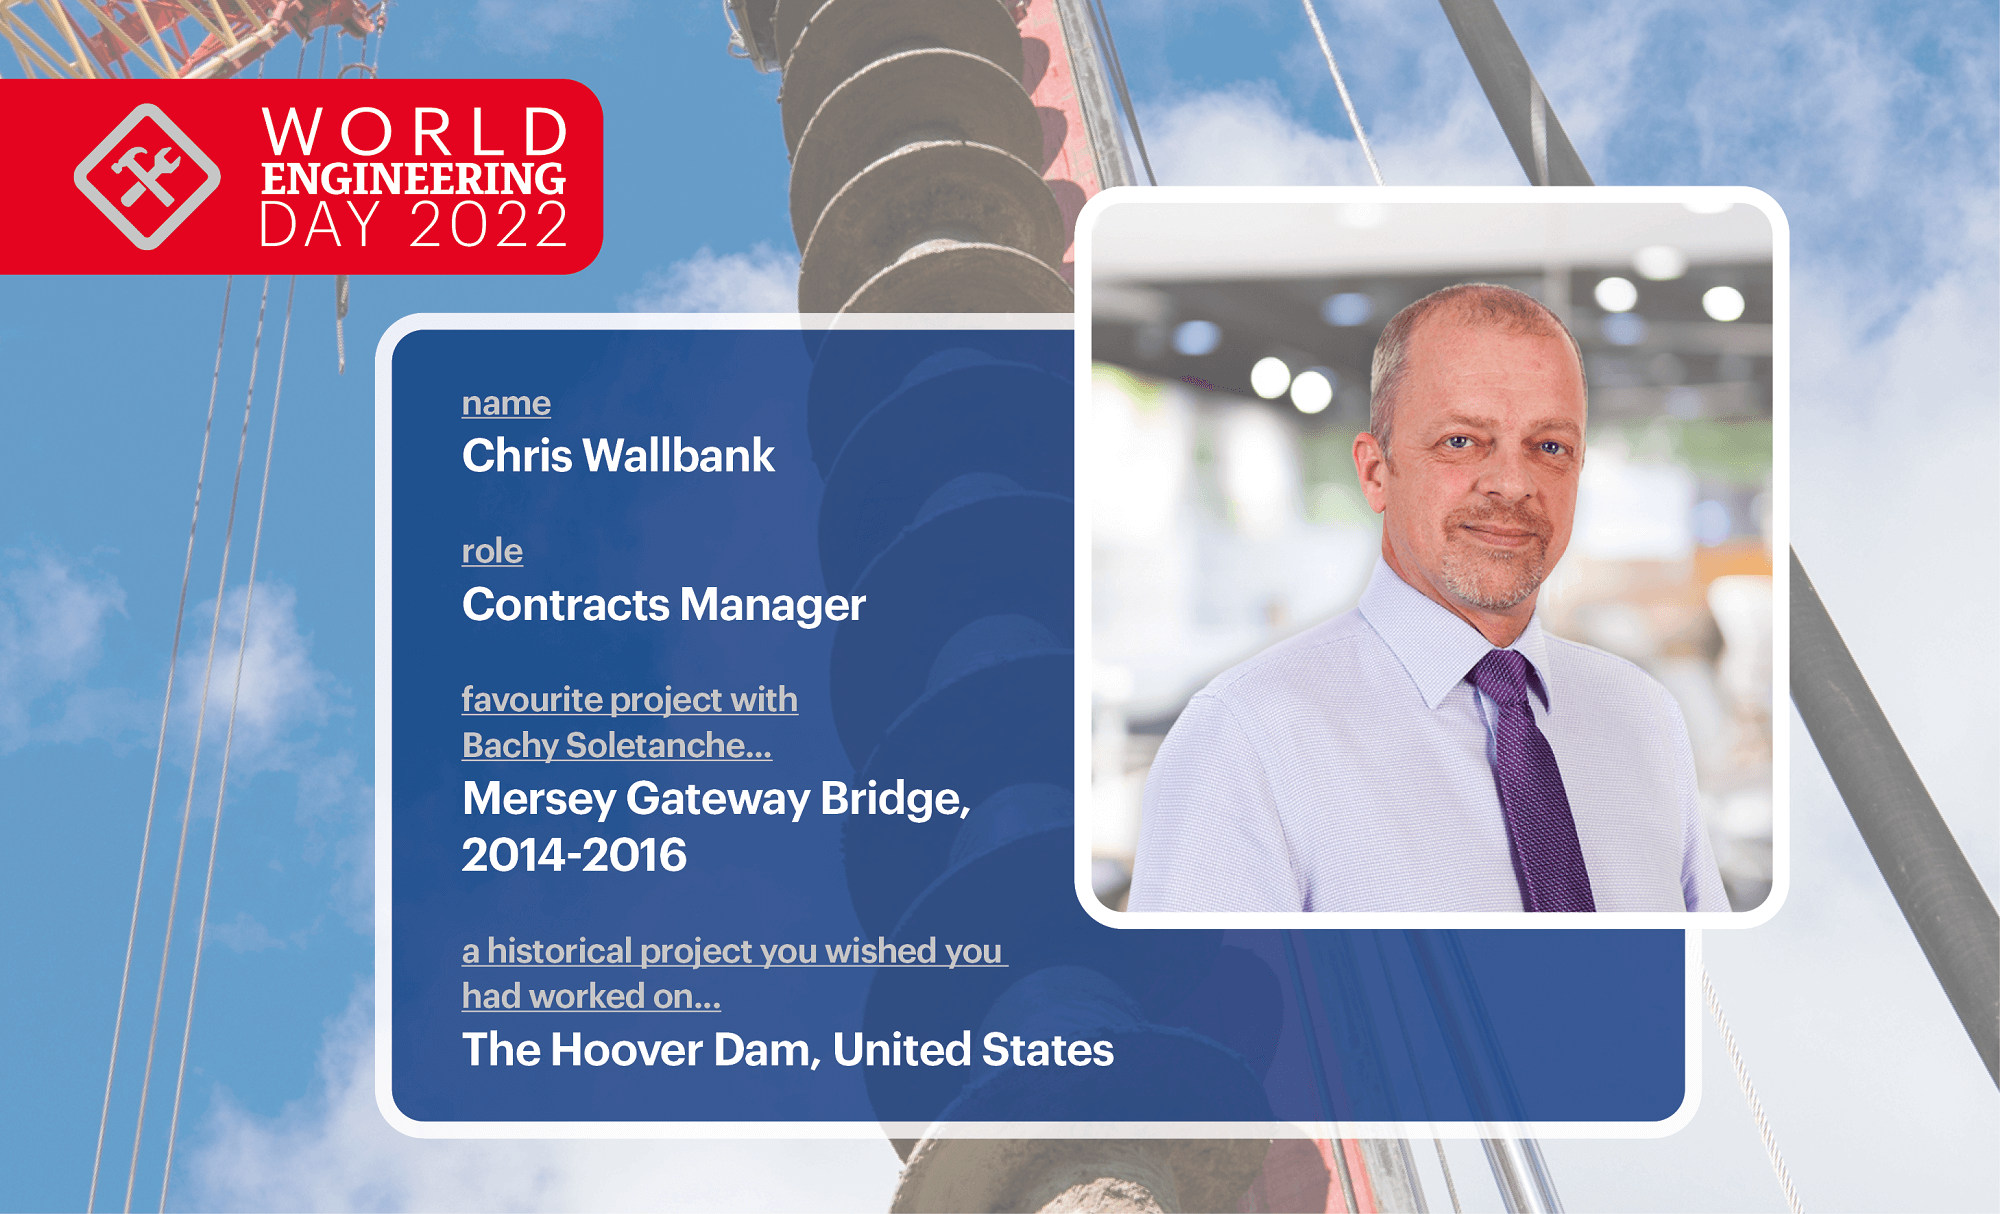 Chris Wallbank, Contracts Manager